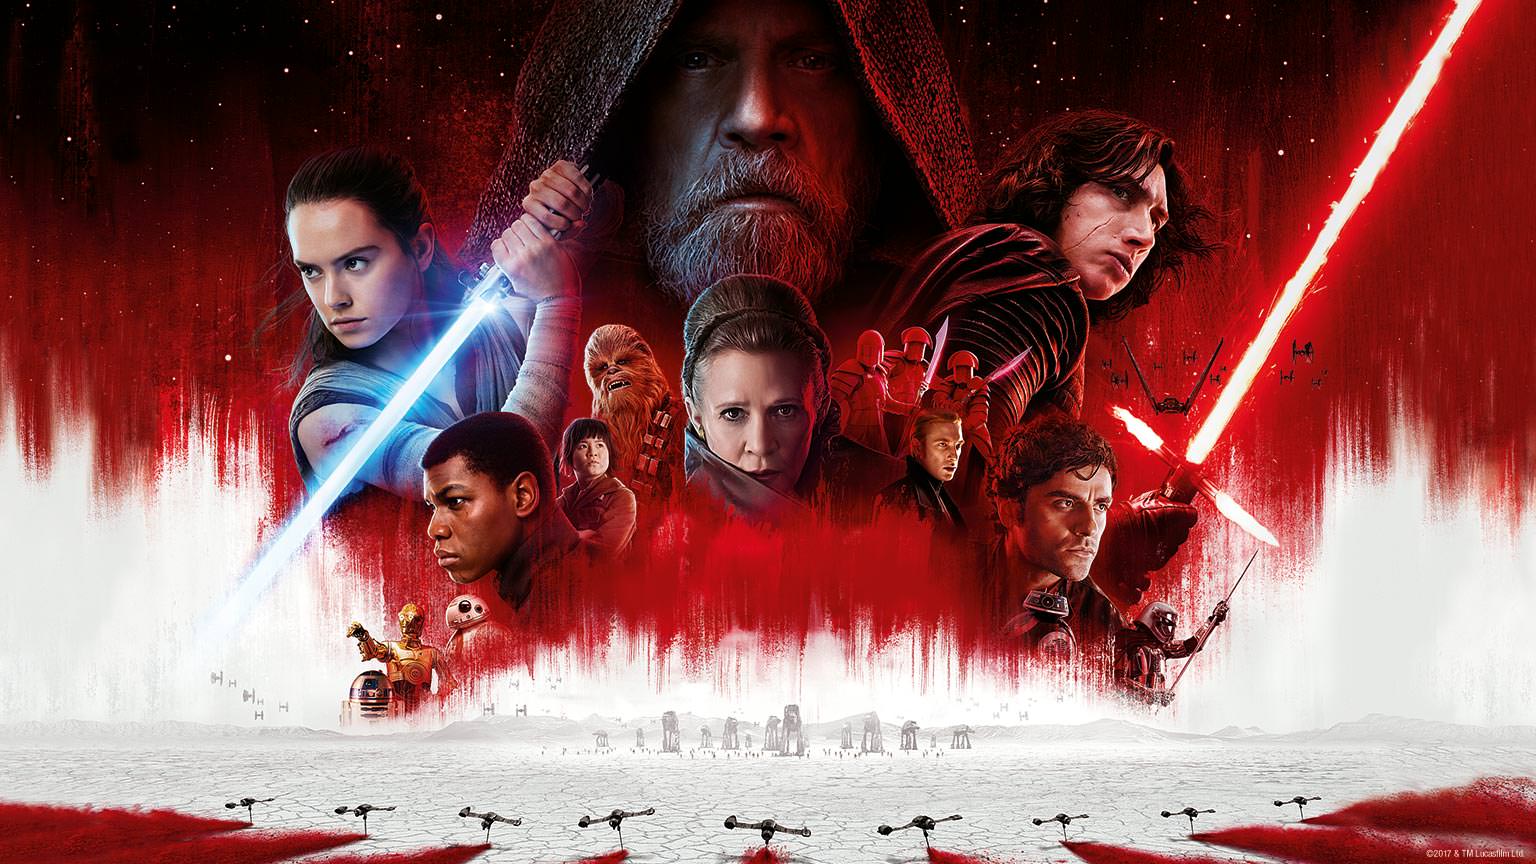 'Star Wars: The Last Jedi' earns second largest opening weekend ever